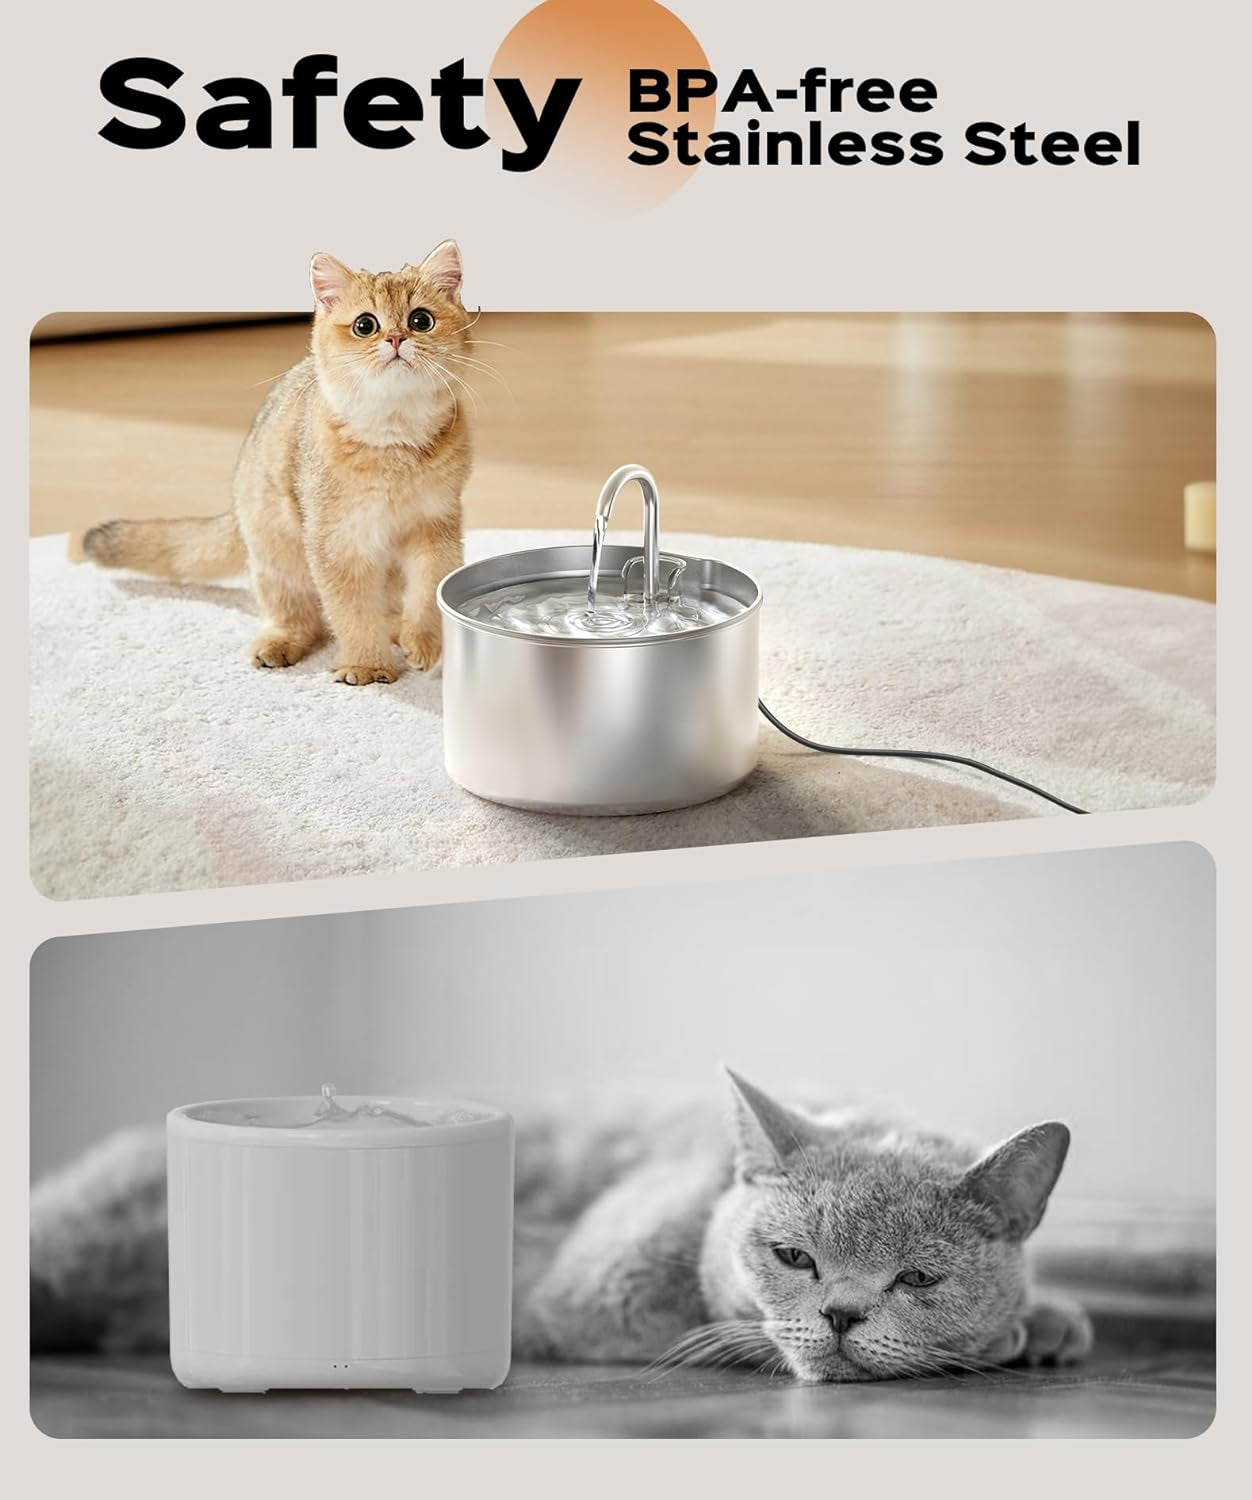 Stainless Steel Cat Water Fountain: Pet Fountains Indoor Metal Automatic Dispenser Cat Waterer Bowls Dog Faucet Bottle Pets 24/7 Running Watering for Drinking Quiet Pump with Filters